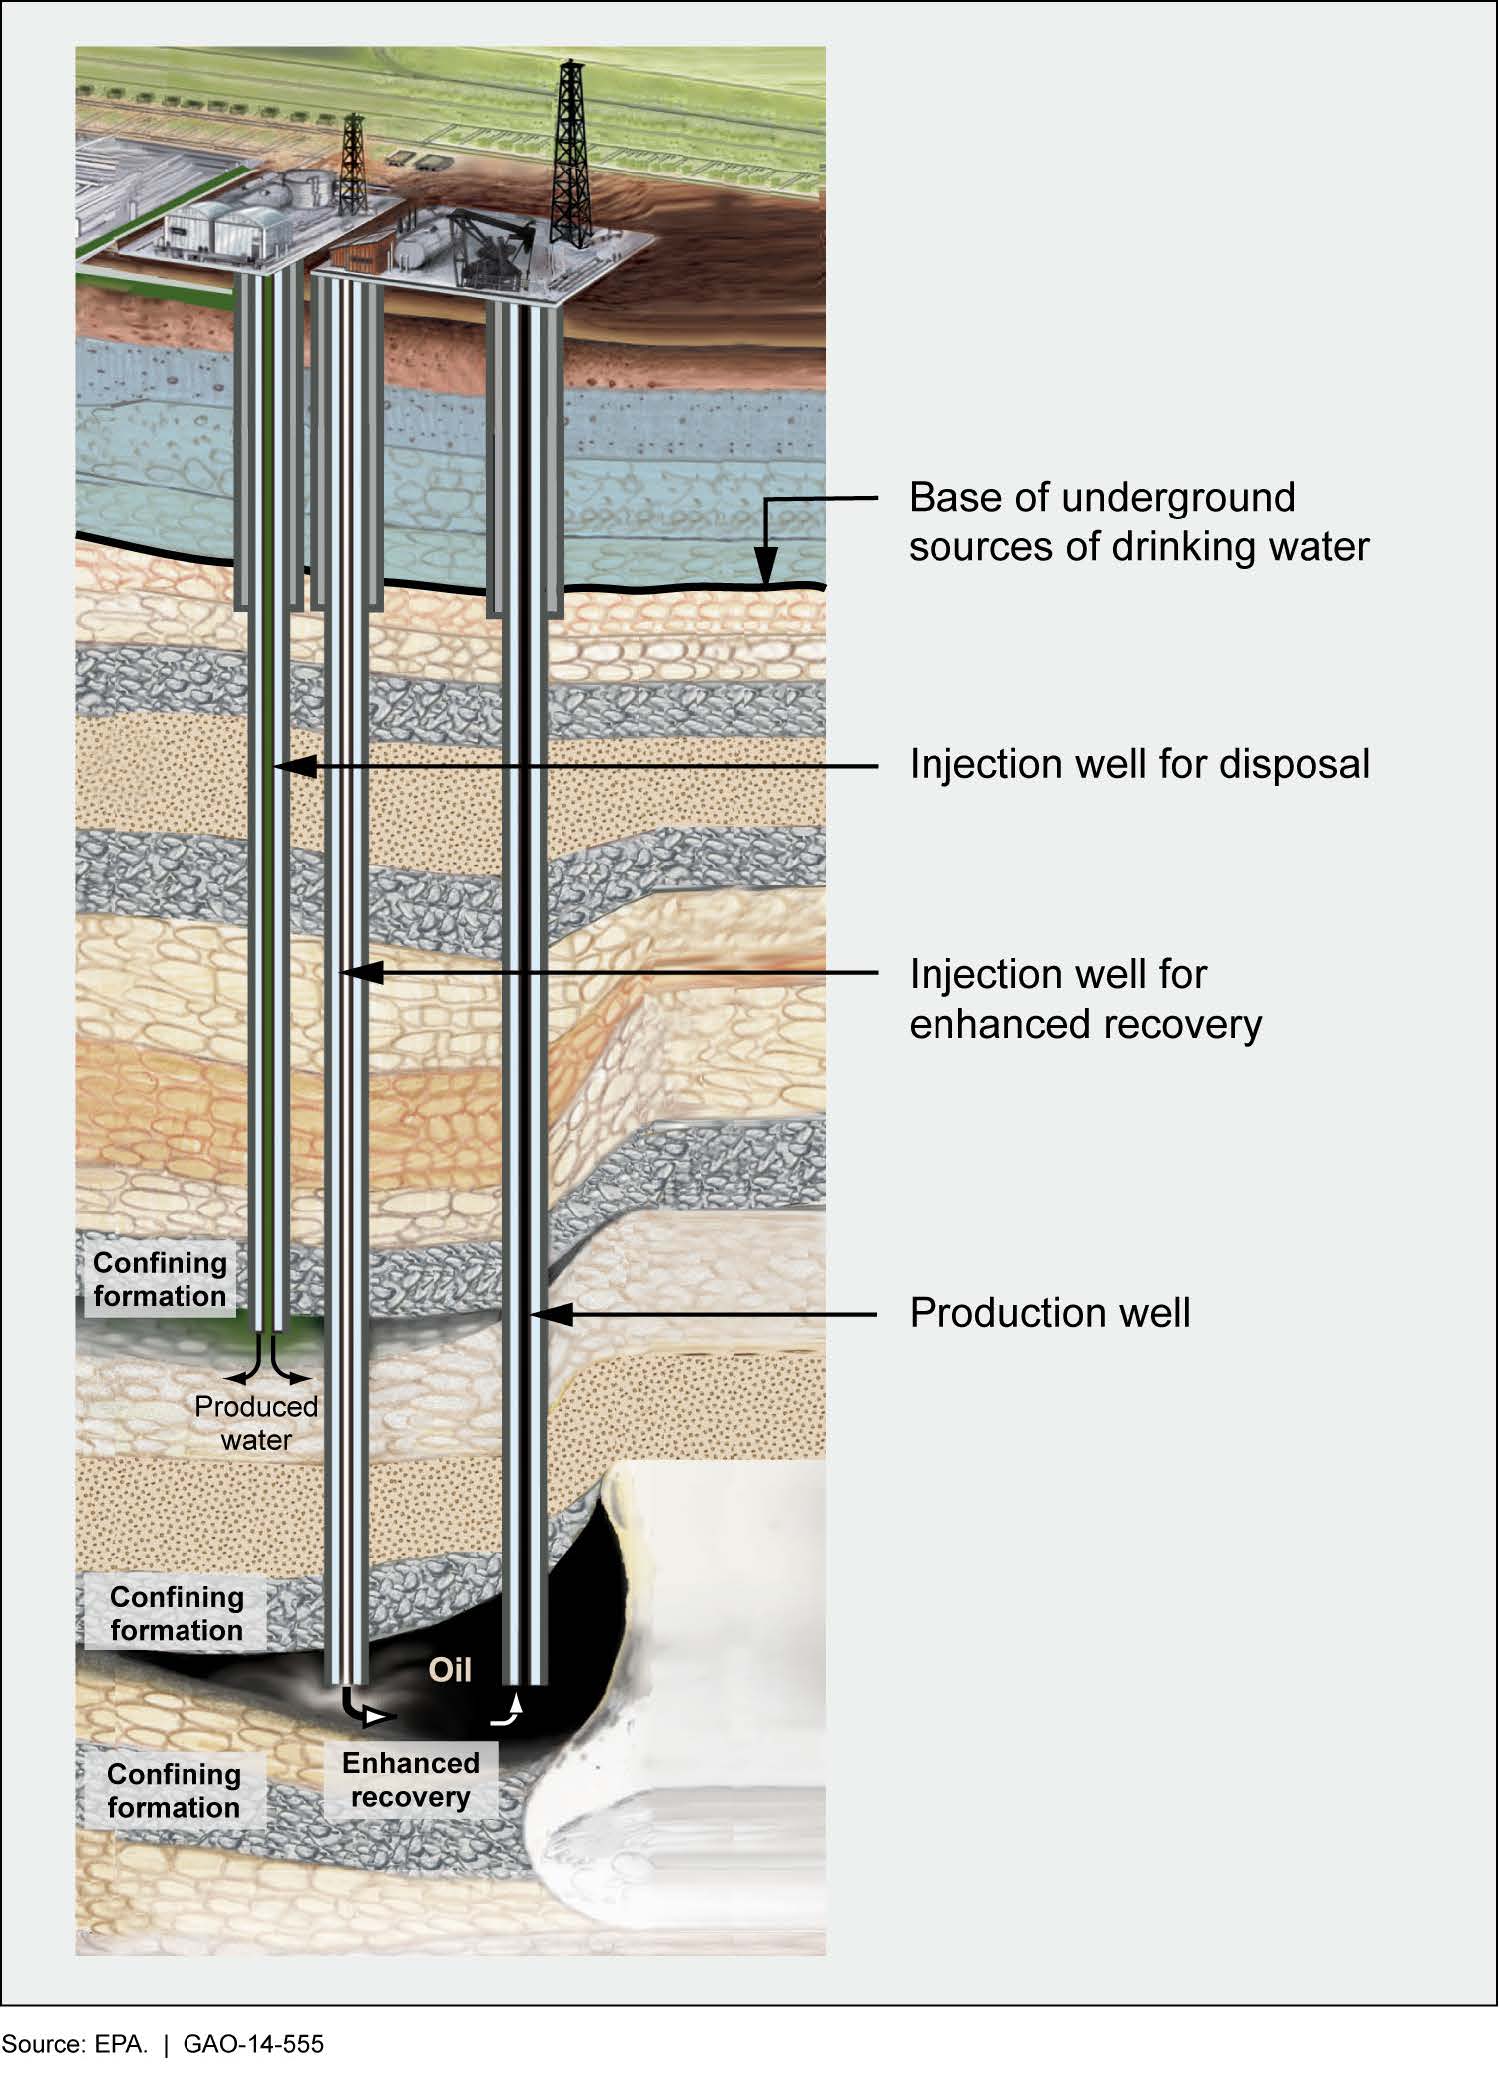 Injection wells for water disposal and to enhance oil recovery. Oil moves up through a production well.